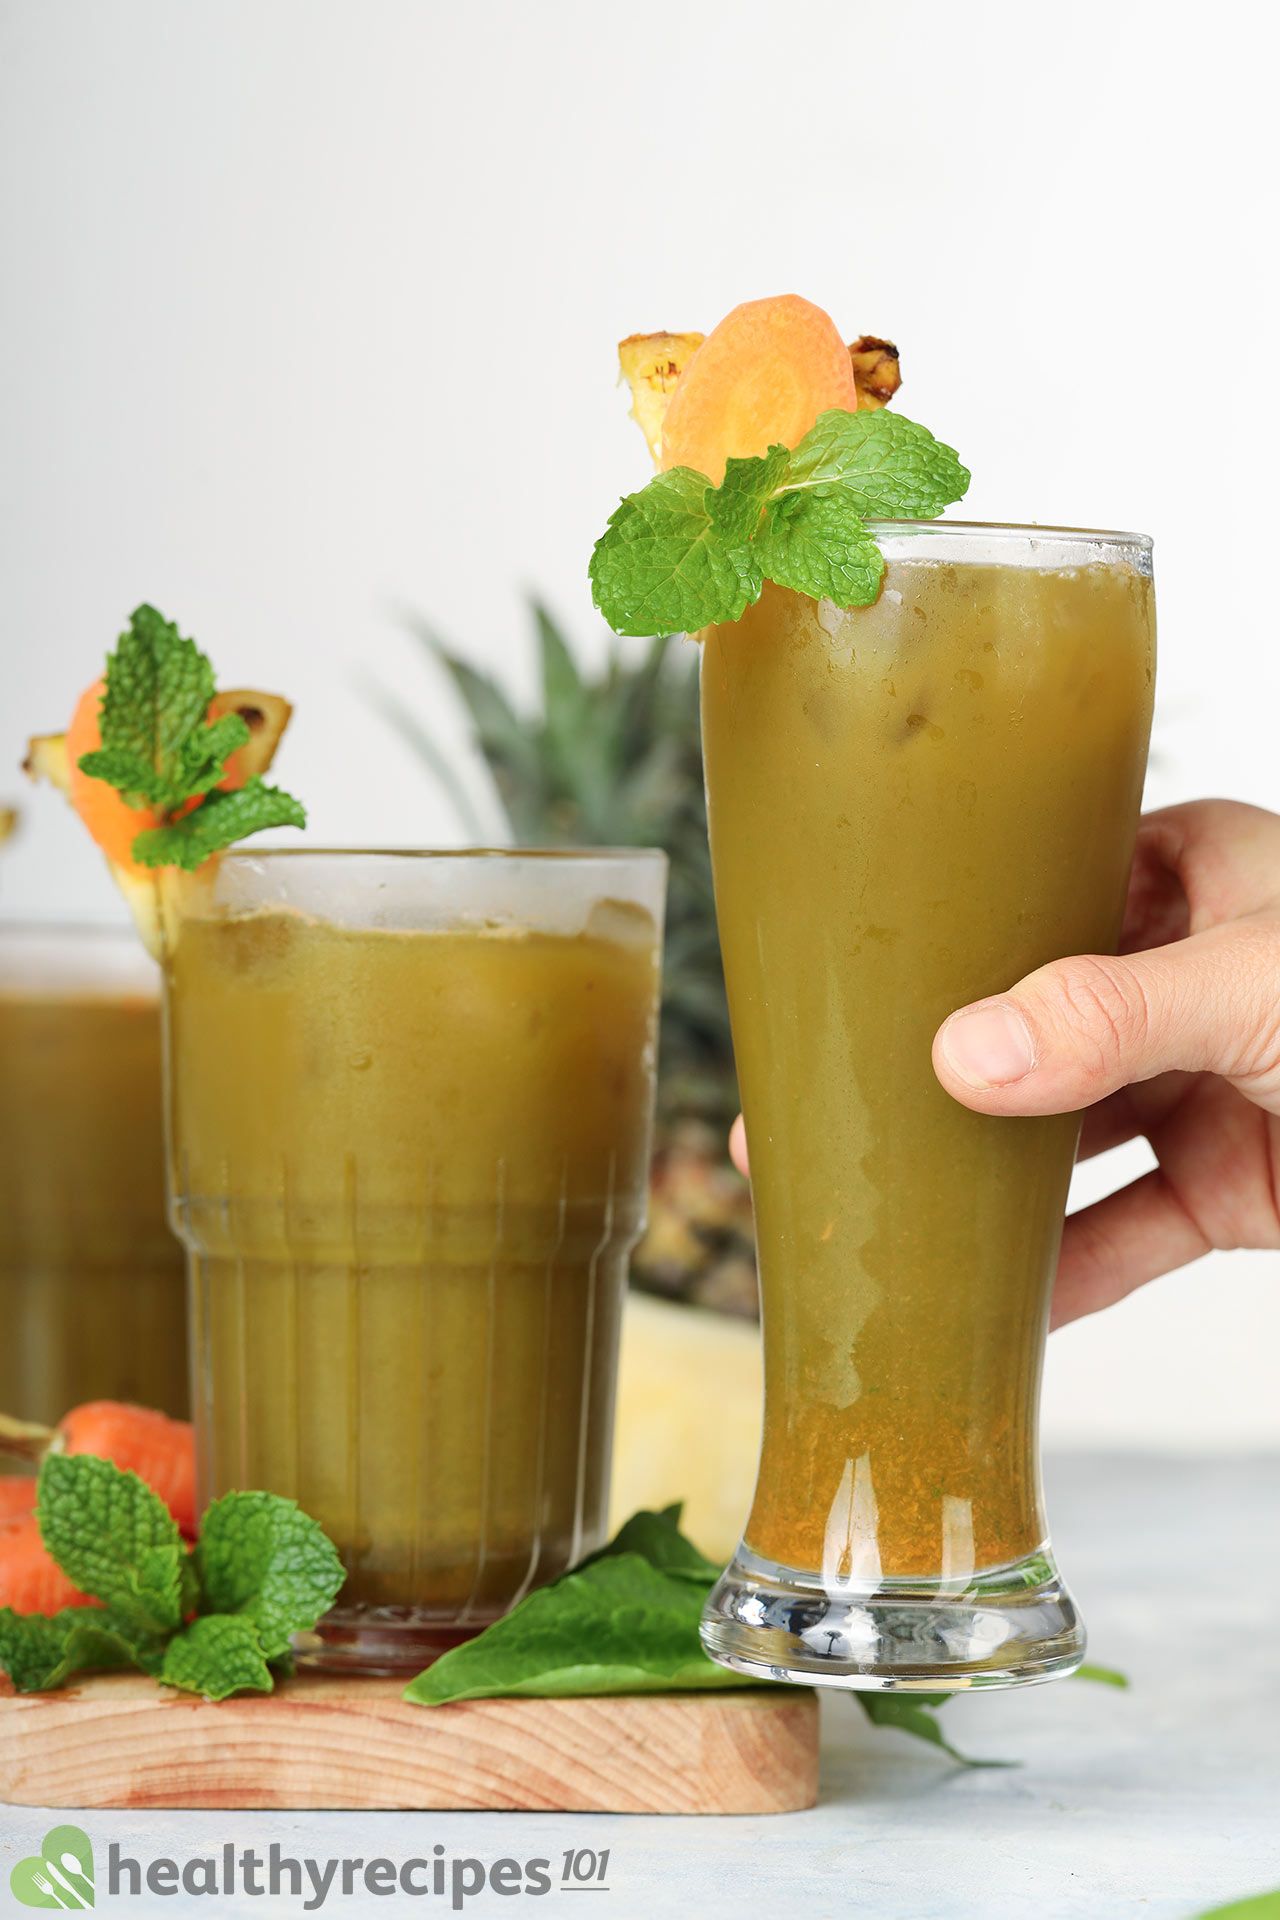 Homemade Spinach Carrot Juice Recipe